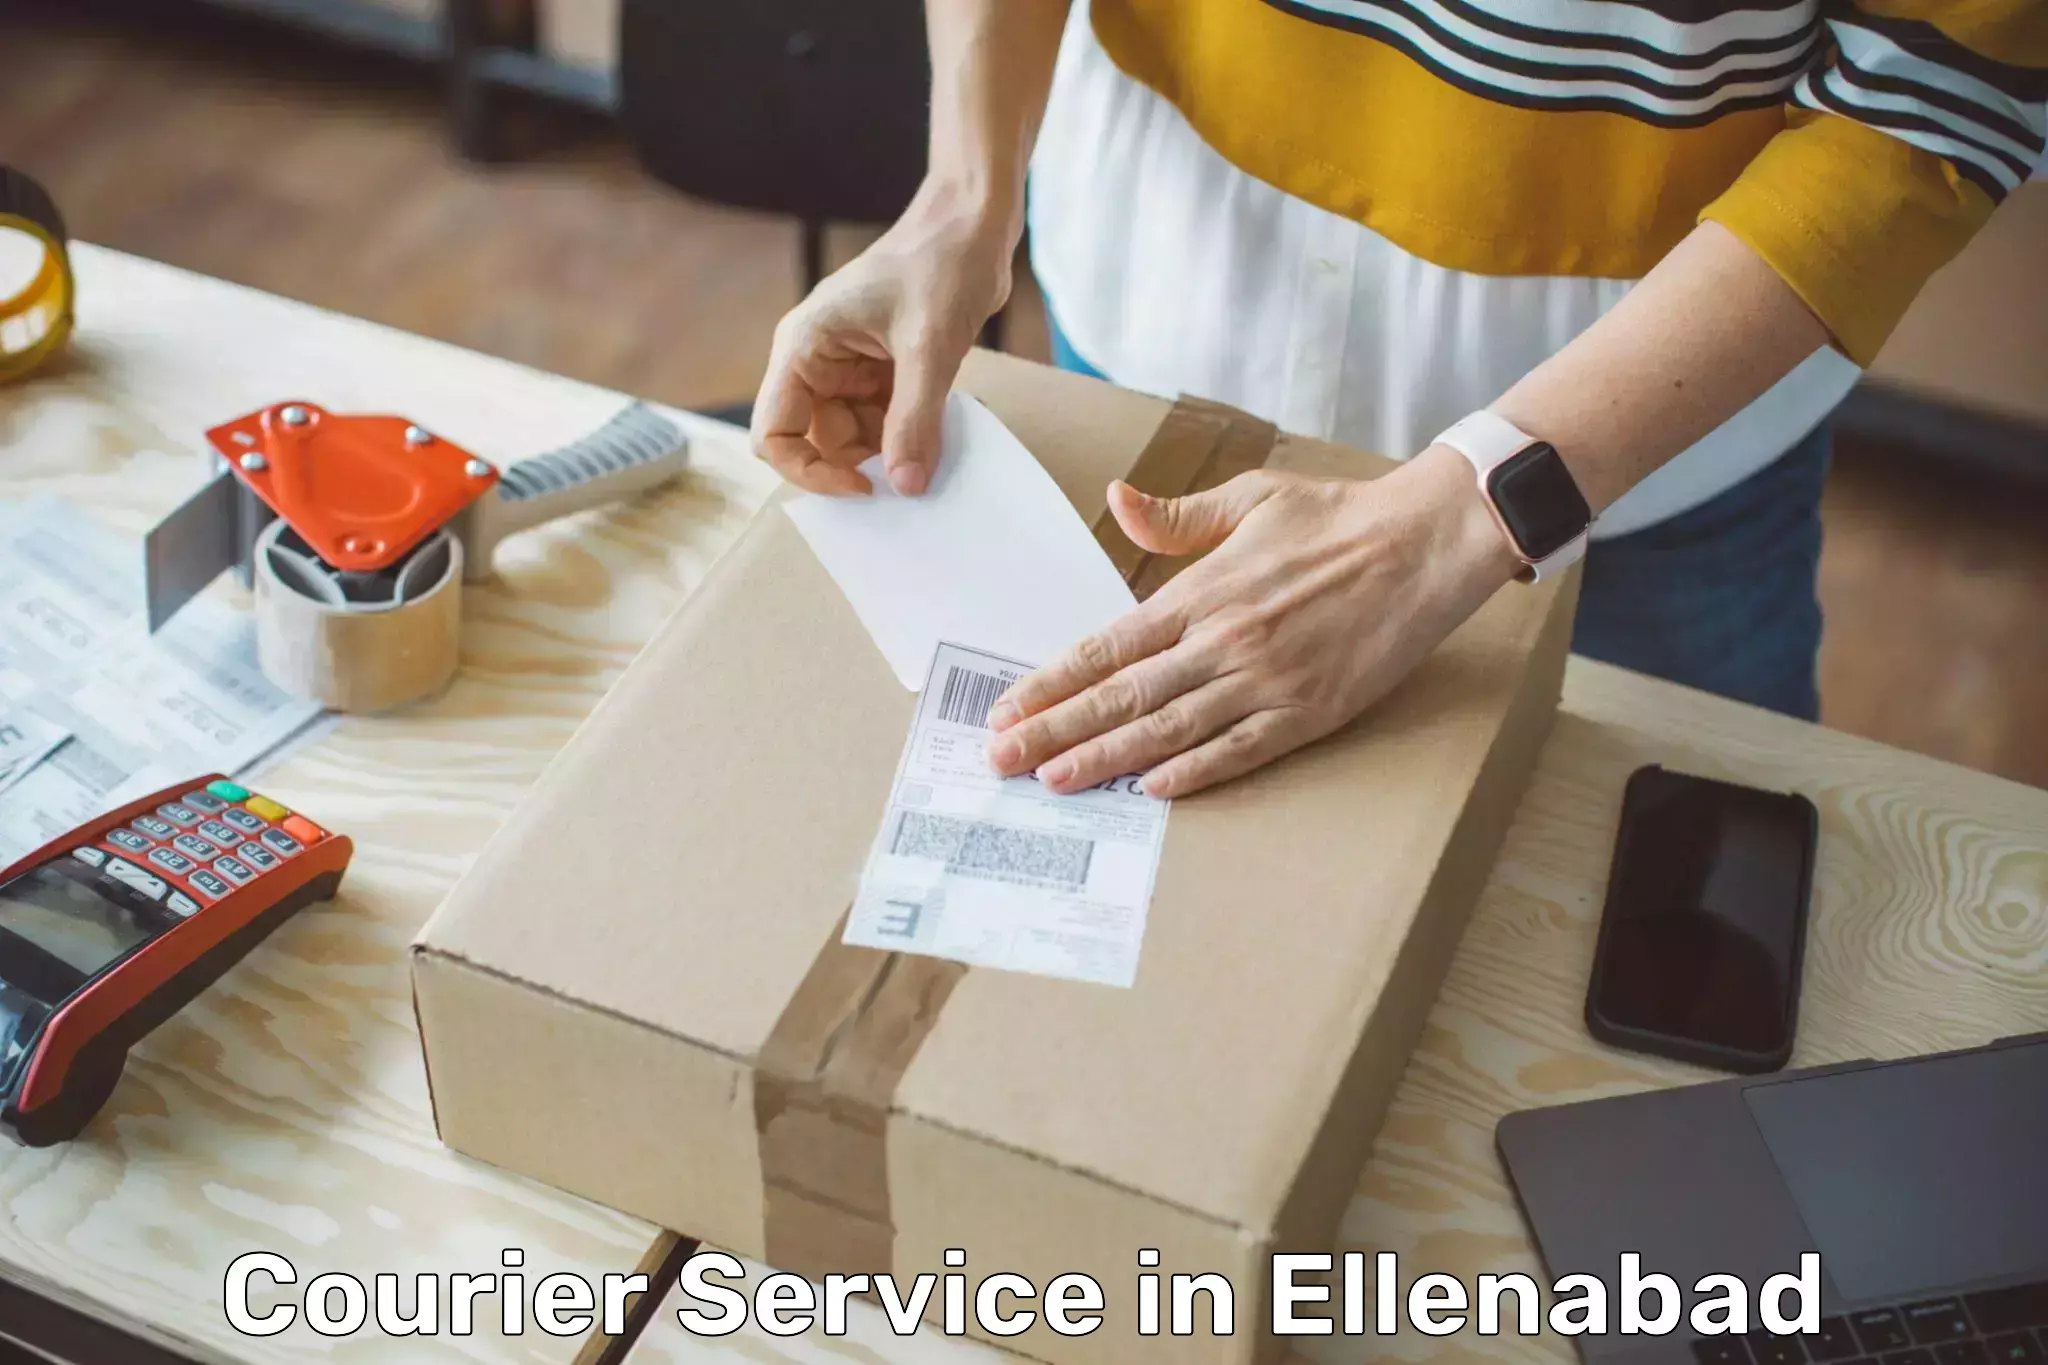 Postal and courier services in Ellenabad